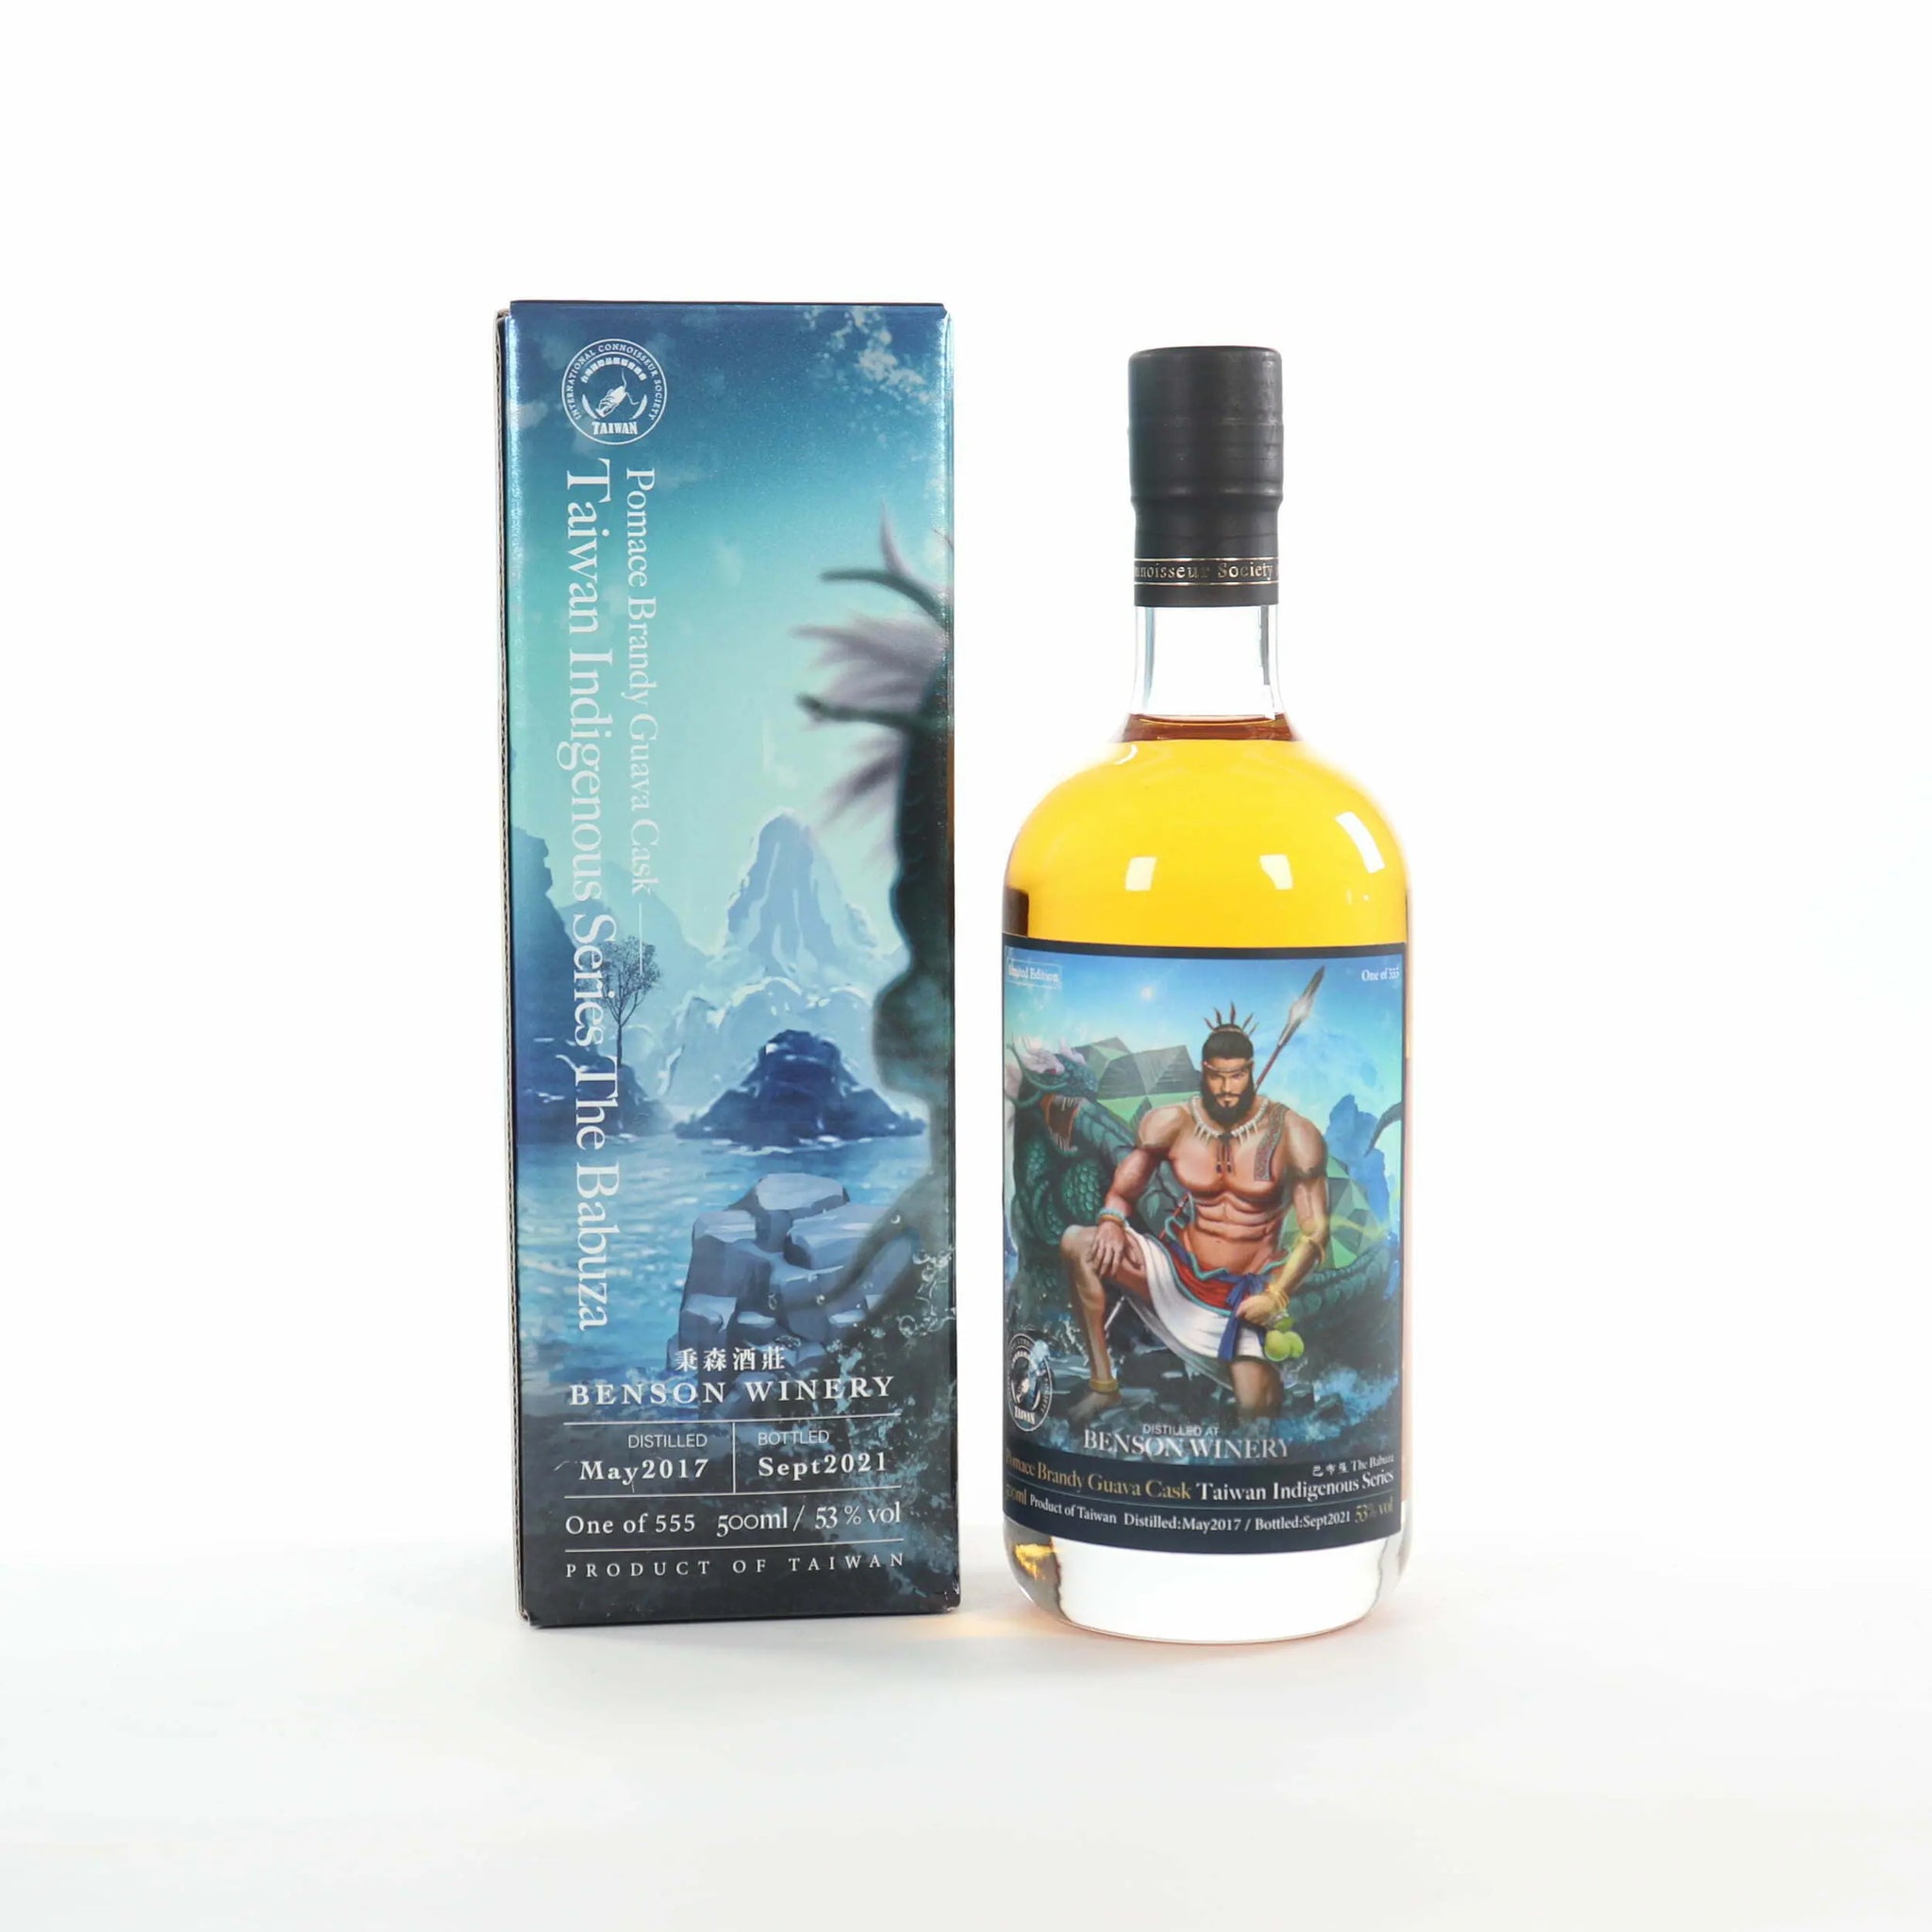 Benson Winery Pomace Brandy Guava Cask Taiwan Indigenous Series (The Babuza) (1x50cl) - TwoMoreGlasses.com